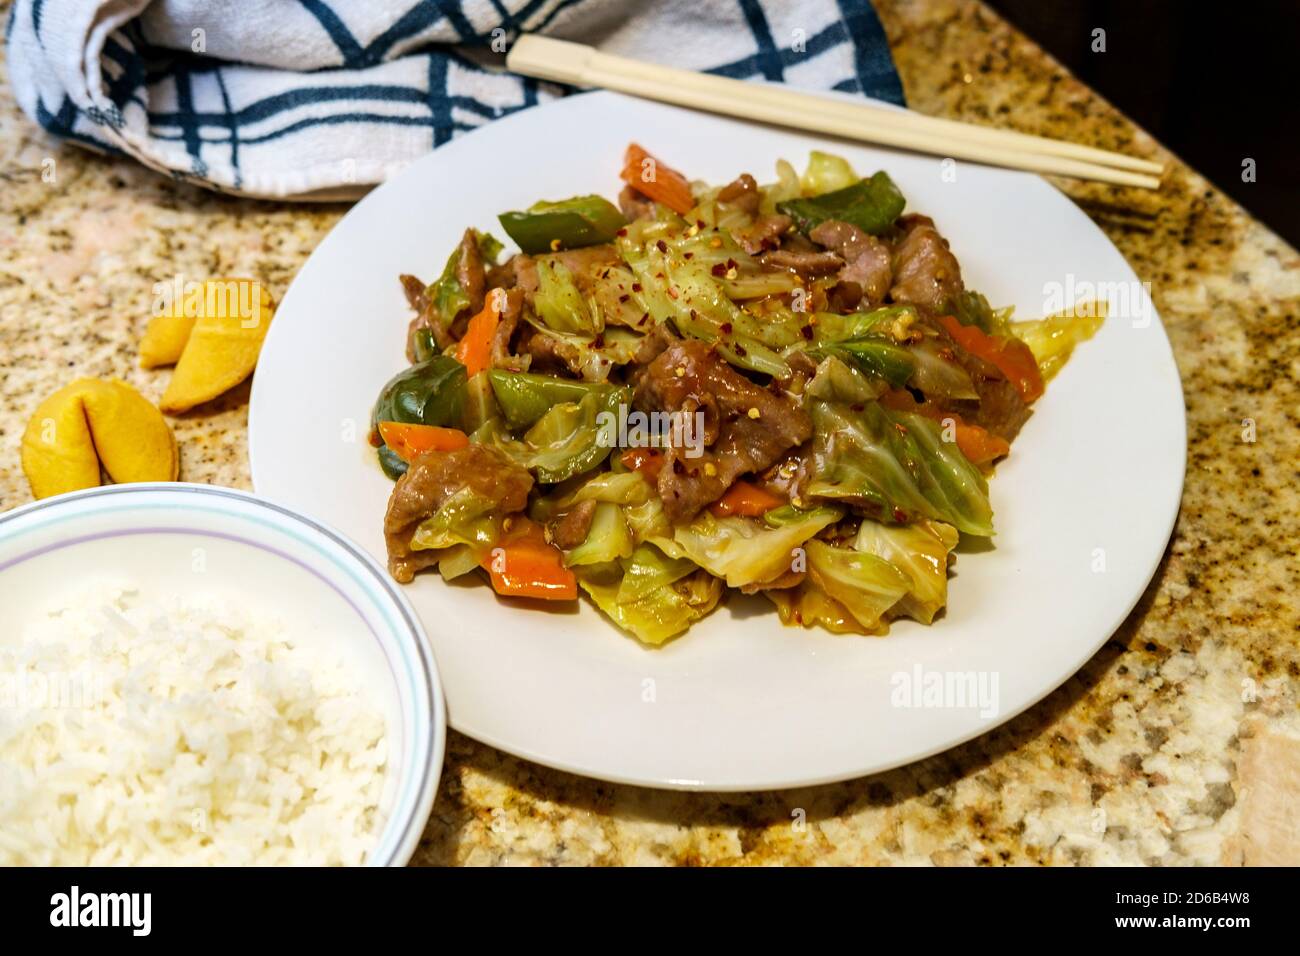 Twice Cooked Pork Or Double Cooked Pork Is A Chinese Dish Include Pork And Stir Fried Vegetables Closeup In The Plate On The Wooden Table Vertical To Stock Photo Alamy